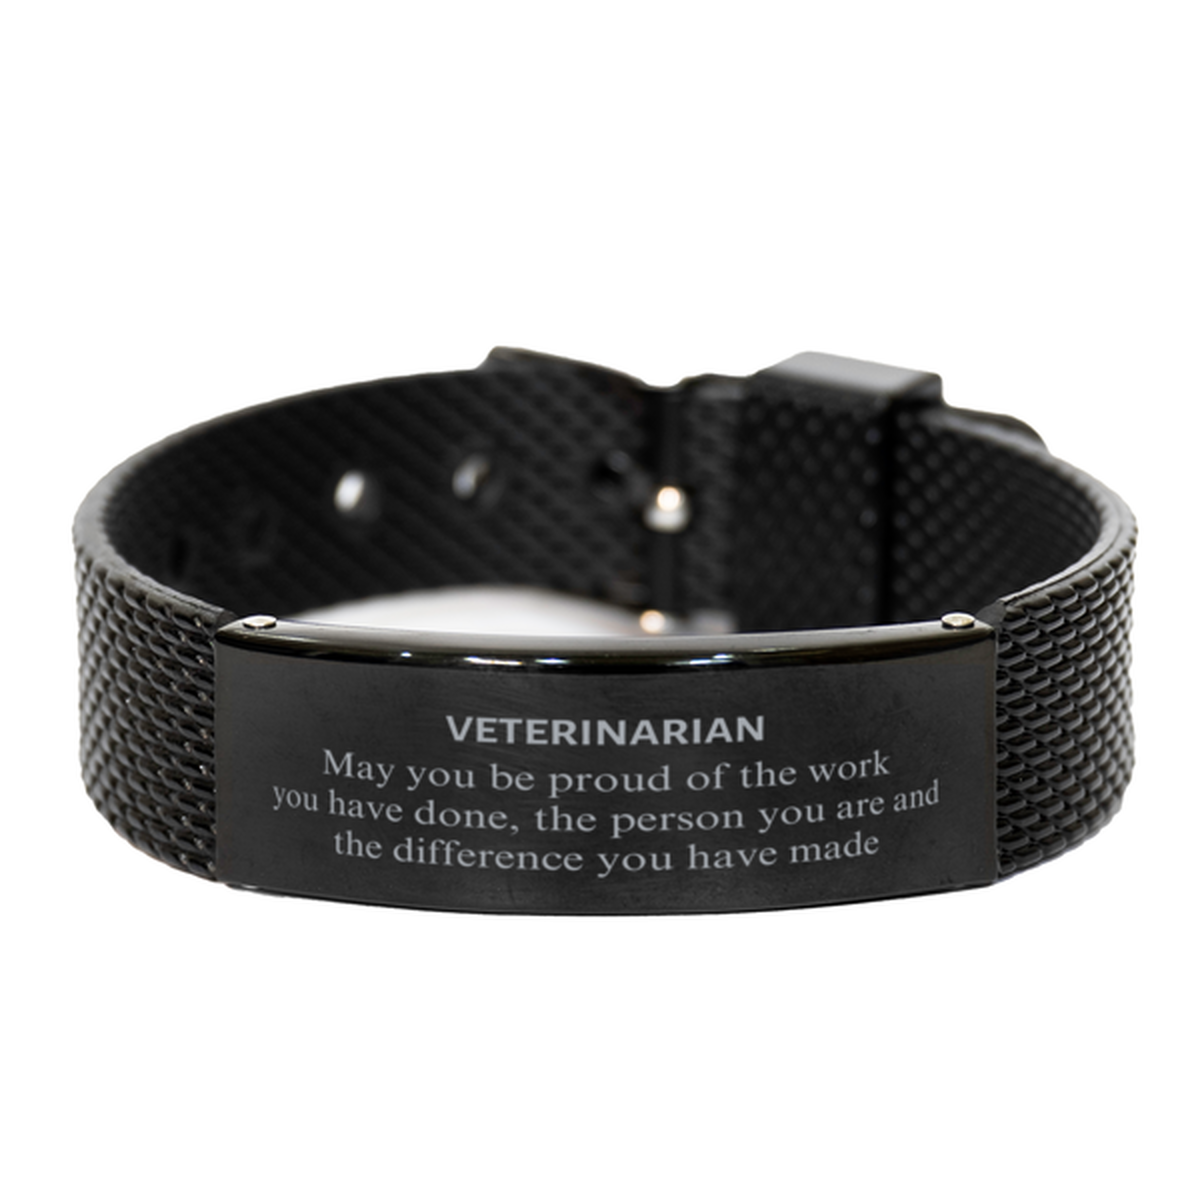 Veterinarian May you be proud of the work you have done, Retirement Veterinarian Black Shark Mesh Bracelet for Colleague Appreciation Gifts Amazing for Veterinarian